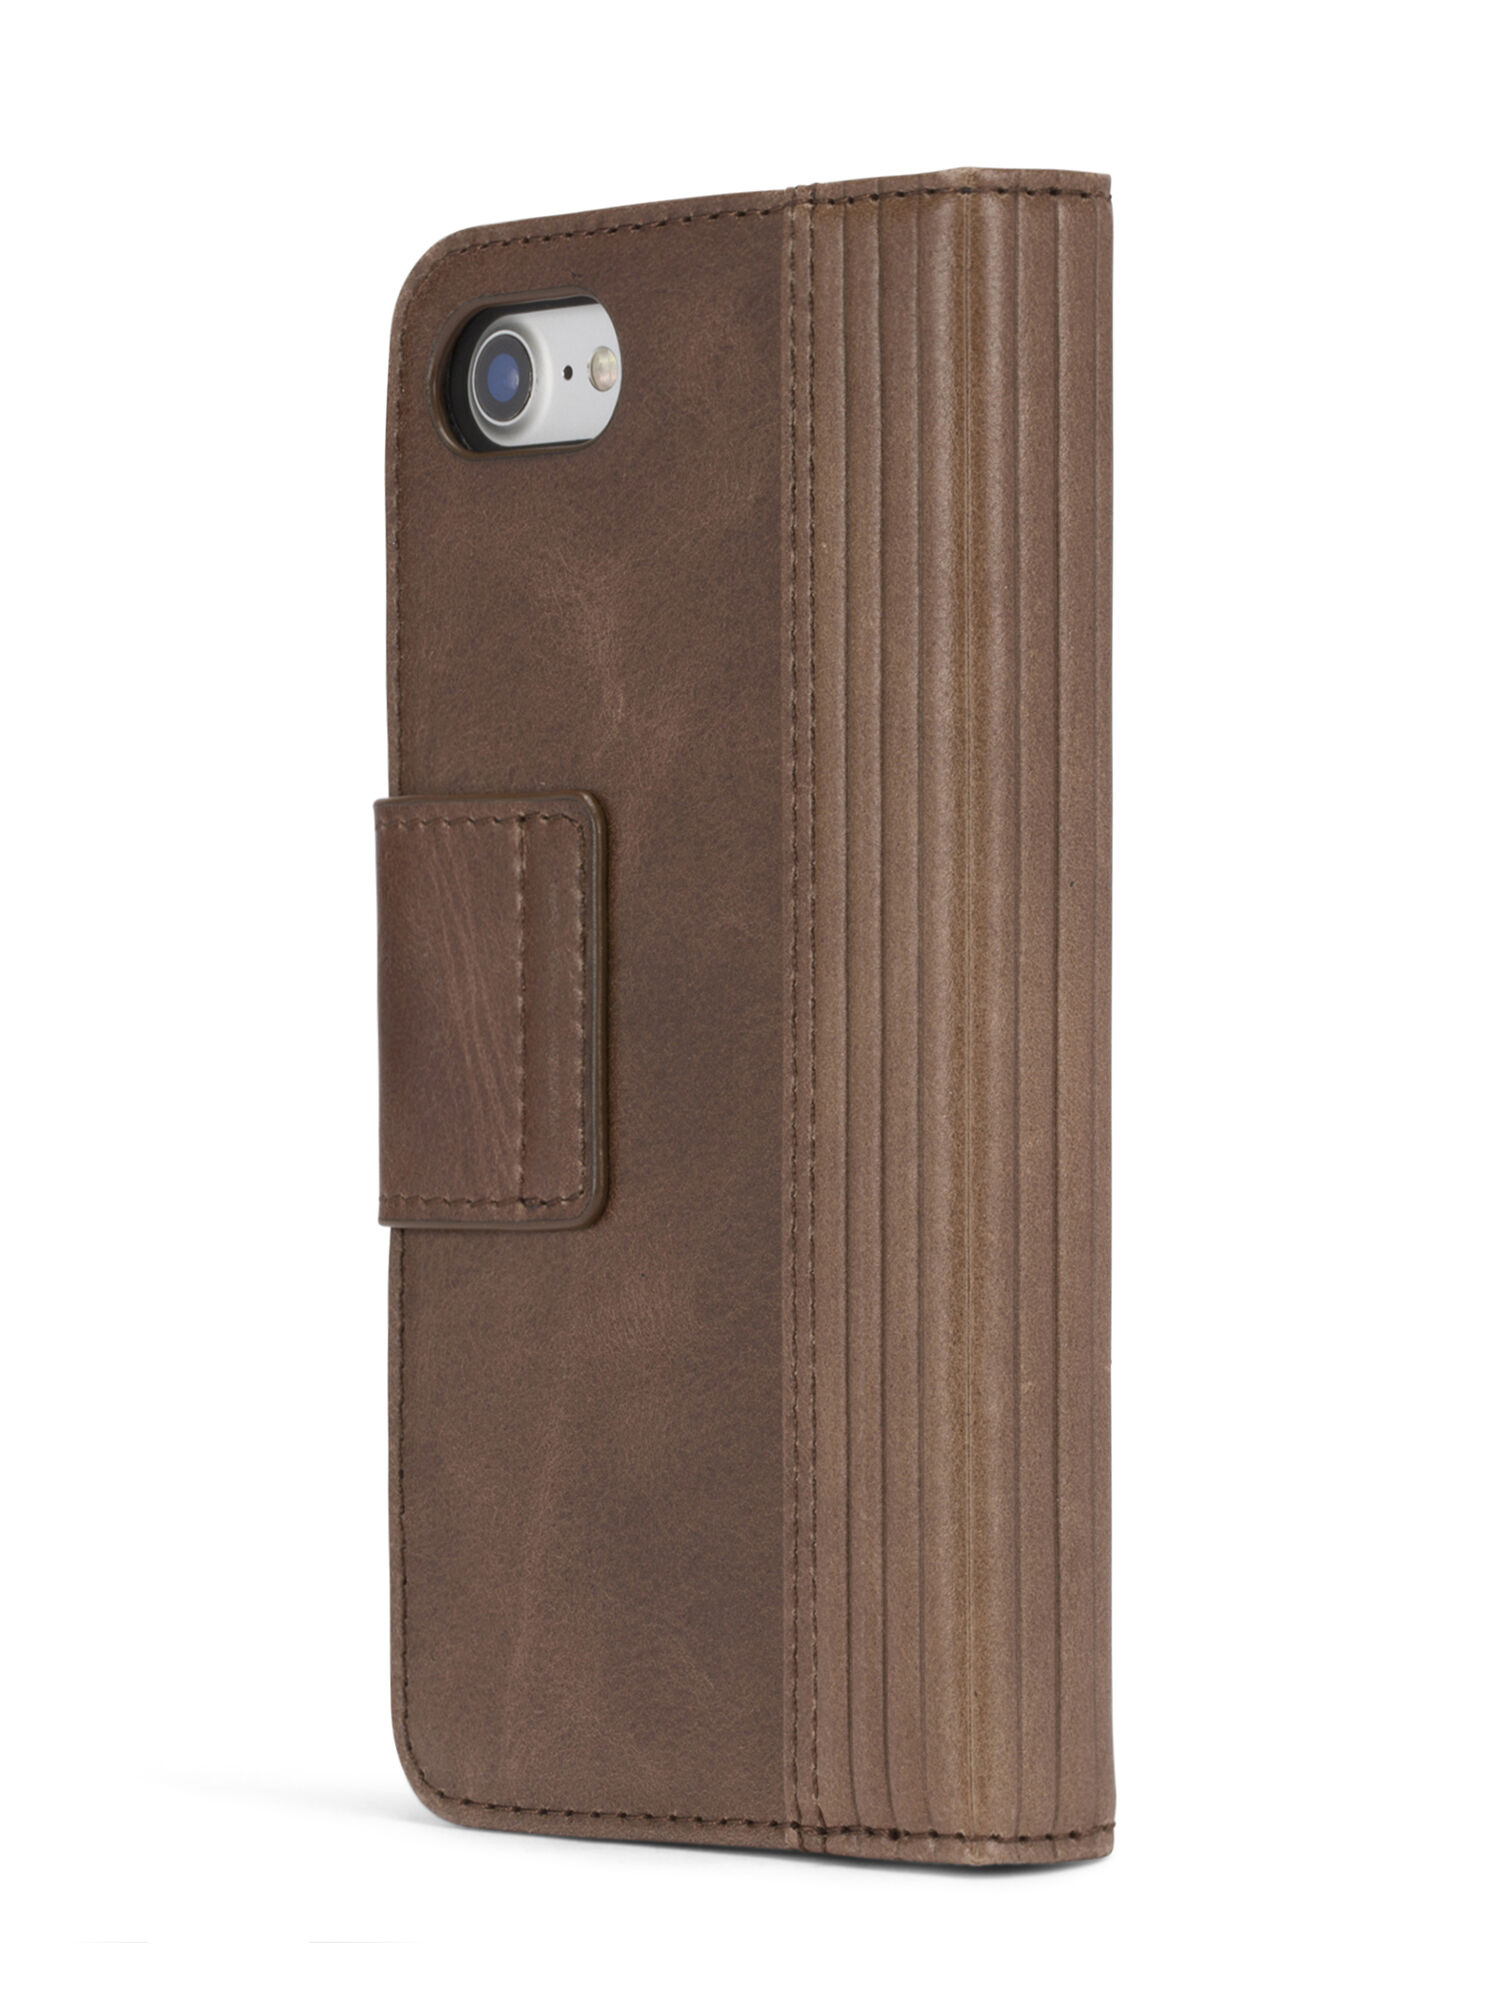 Diesel - BROWN LINED LEATHER IPHONE 8/7 FOLIO,  - Image 5